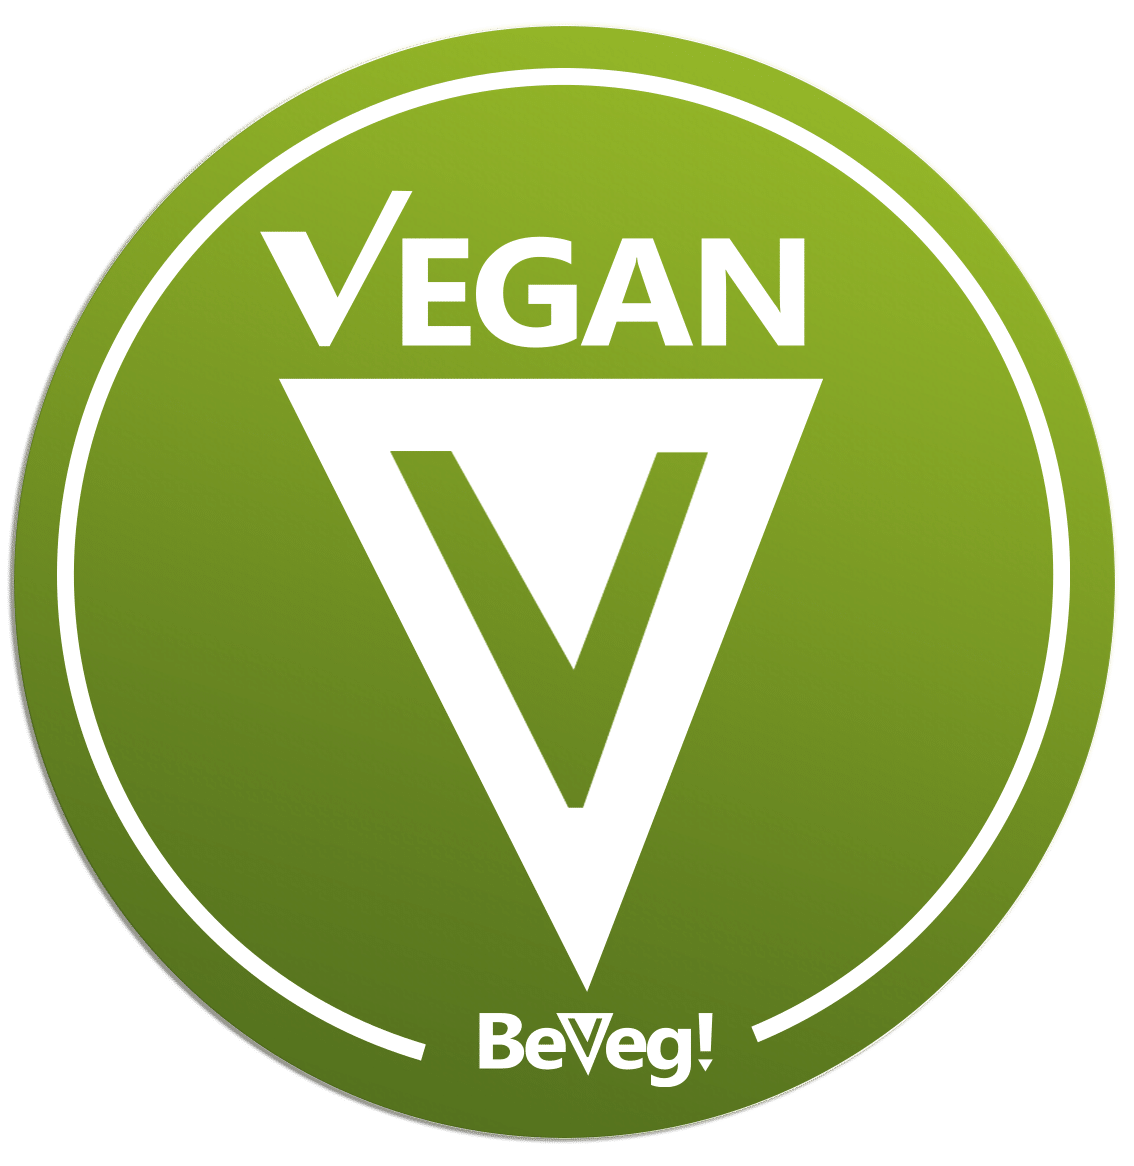 Vegan Certification For Retail Private Labels.